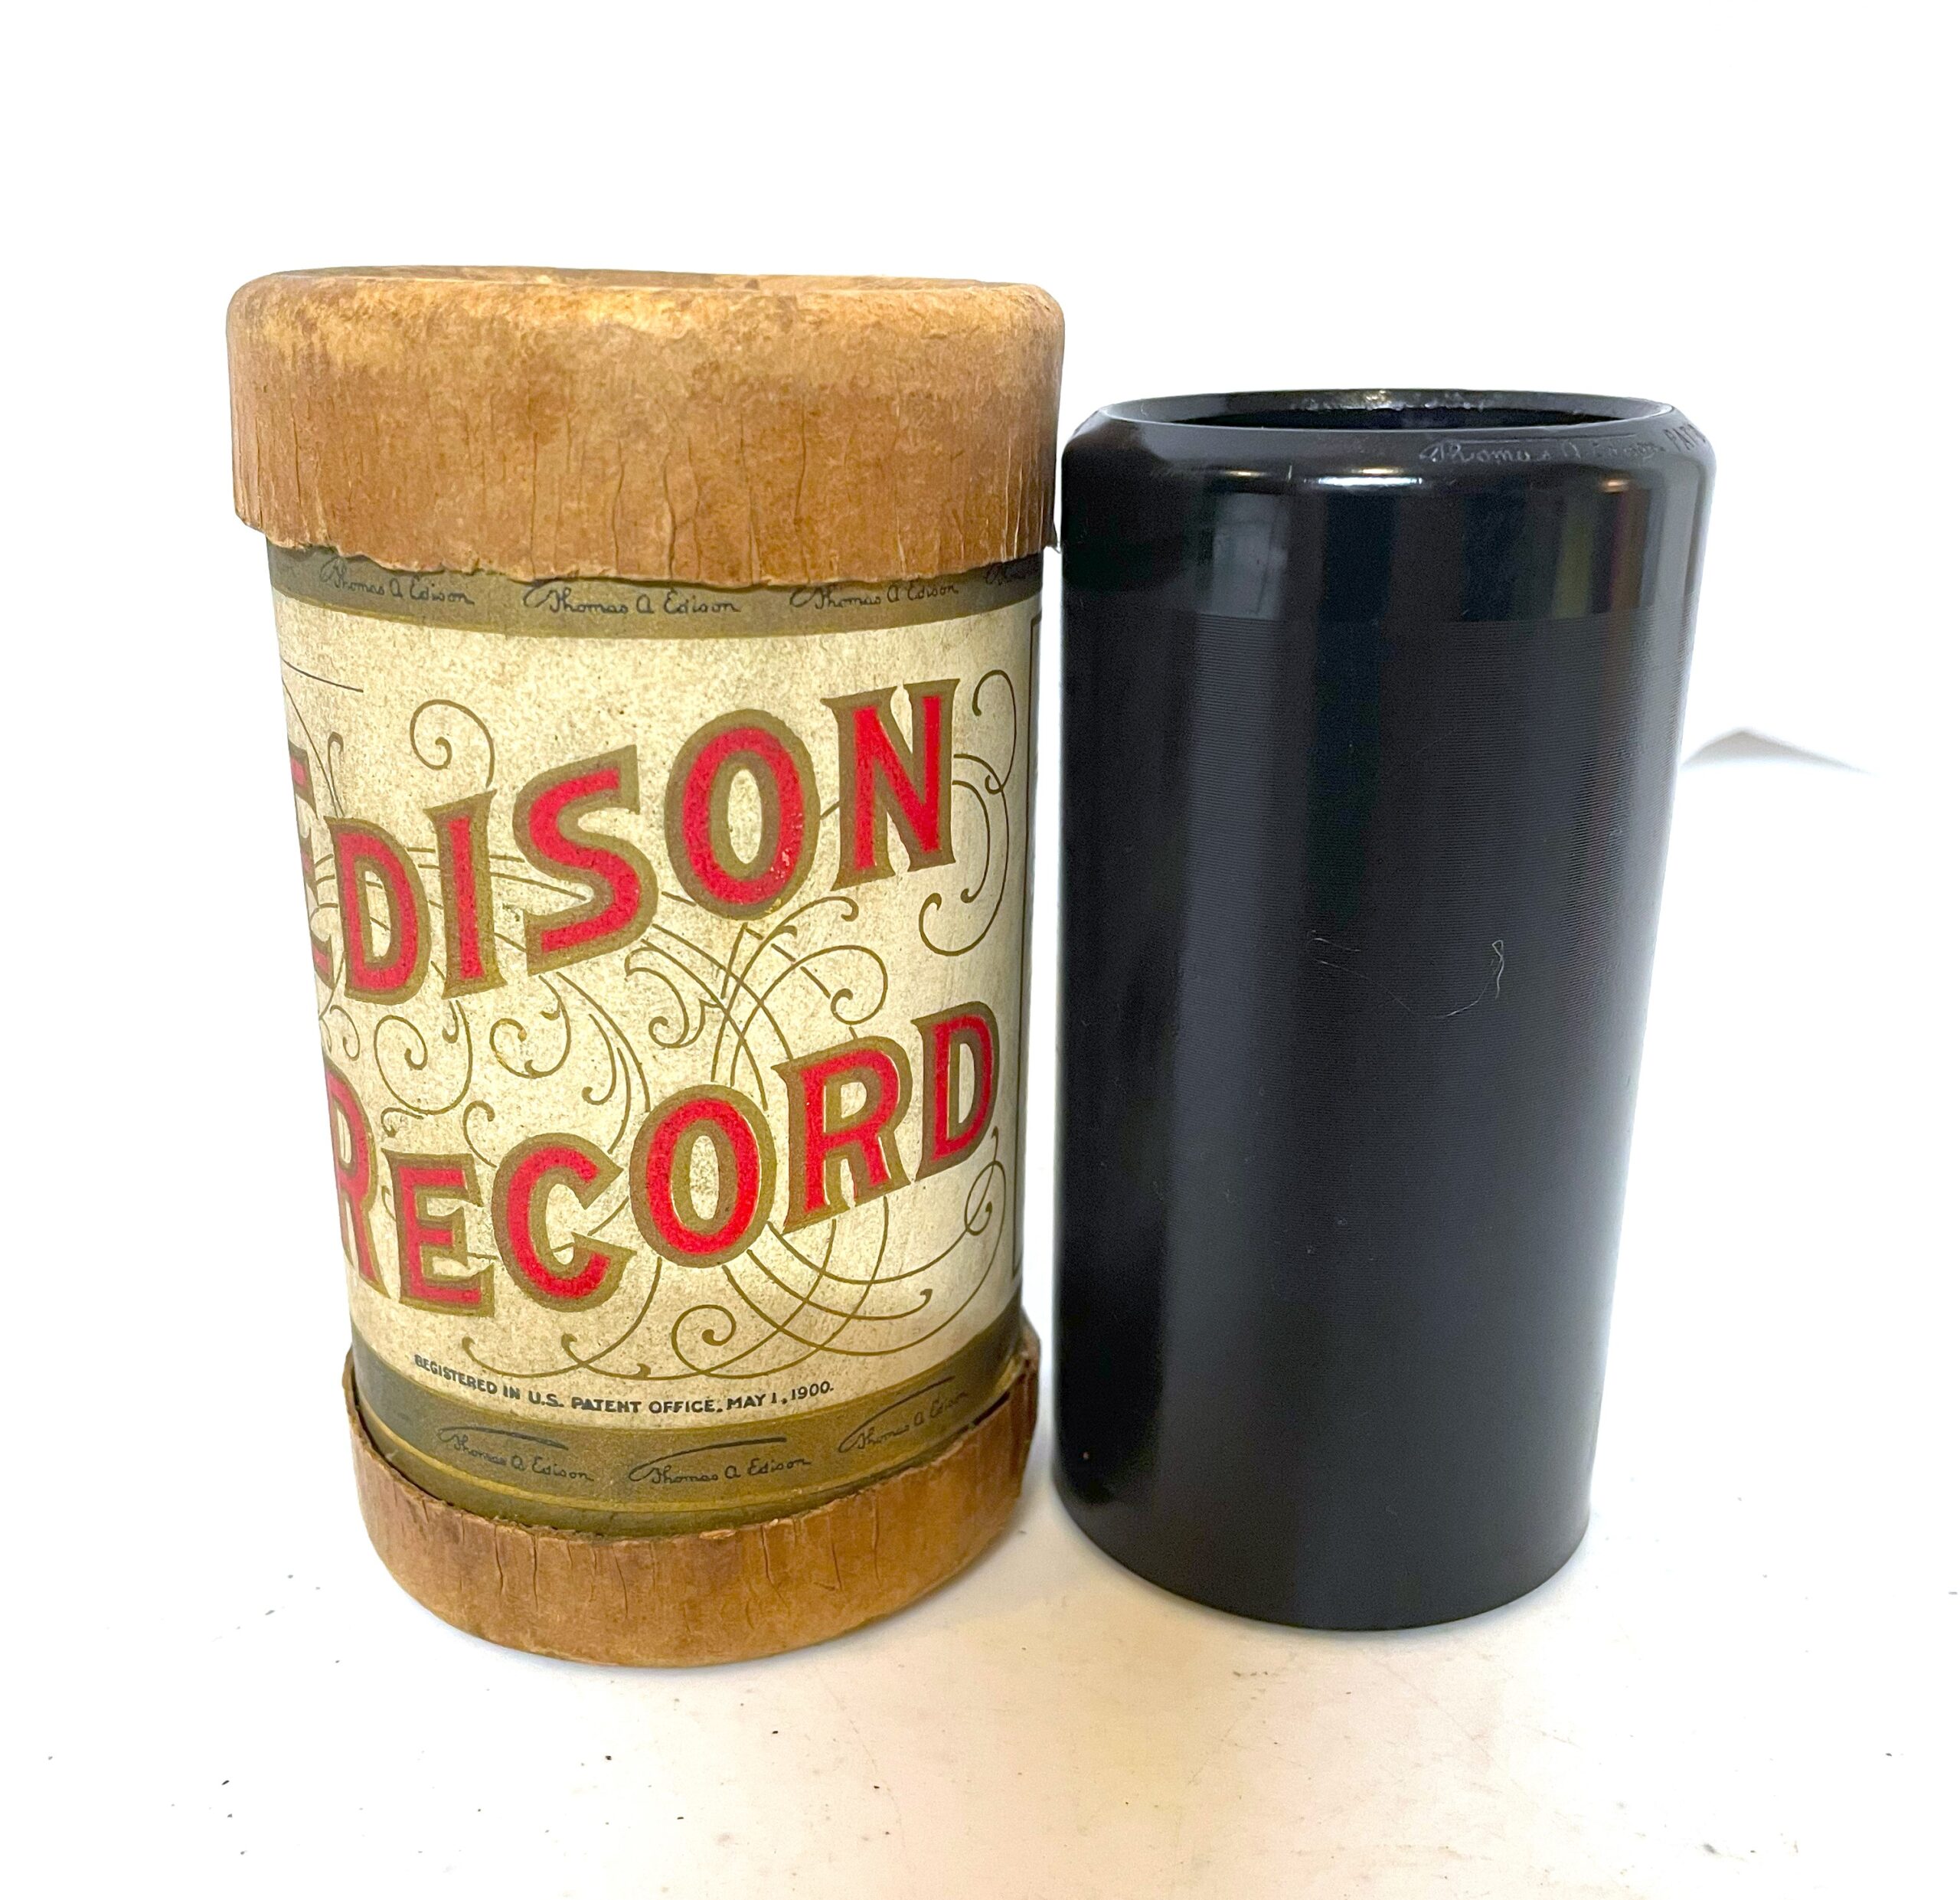 Edison 2-minute Cylinder…” My Wife’s Gone to the Country“